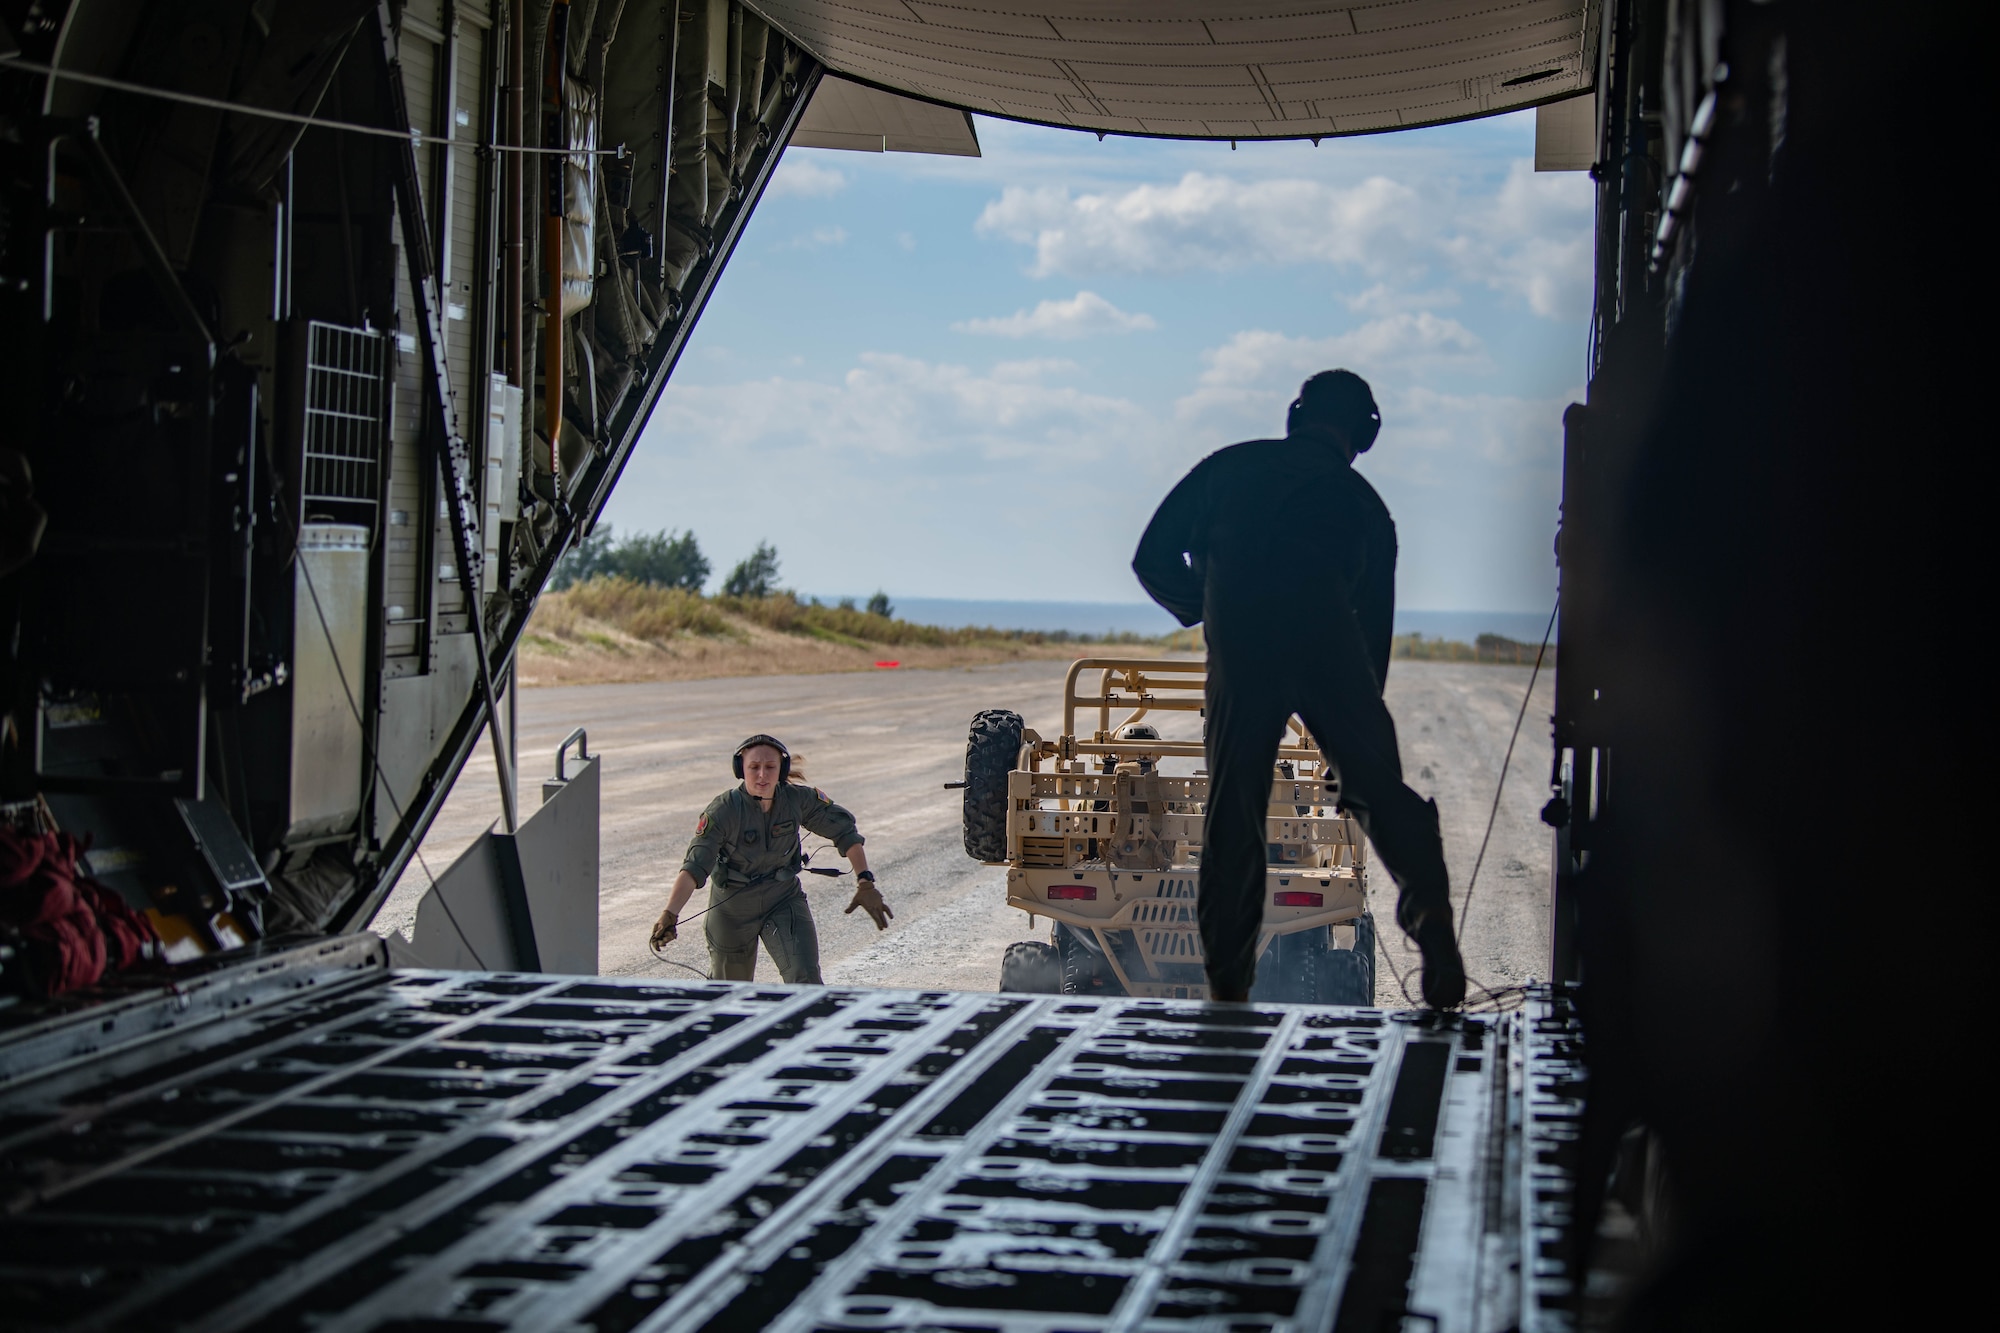 Two Airmen unload a vehicle off of an aircraft.